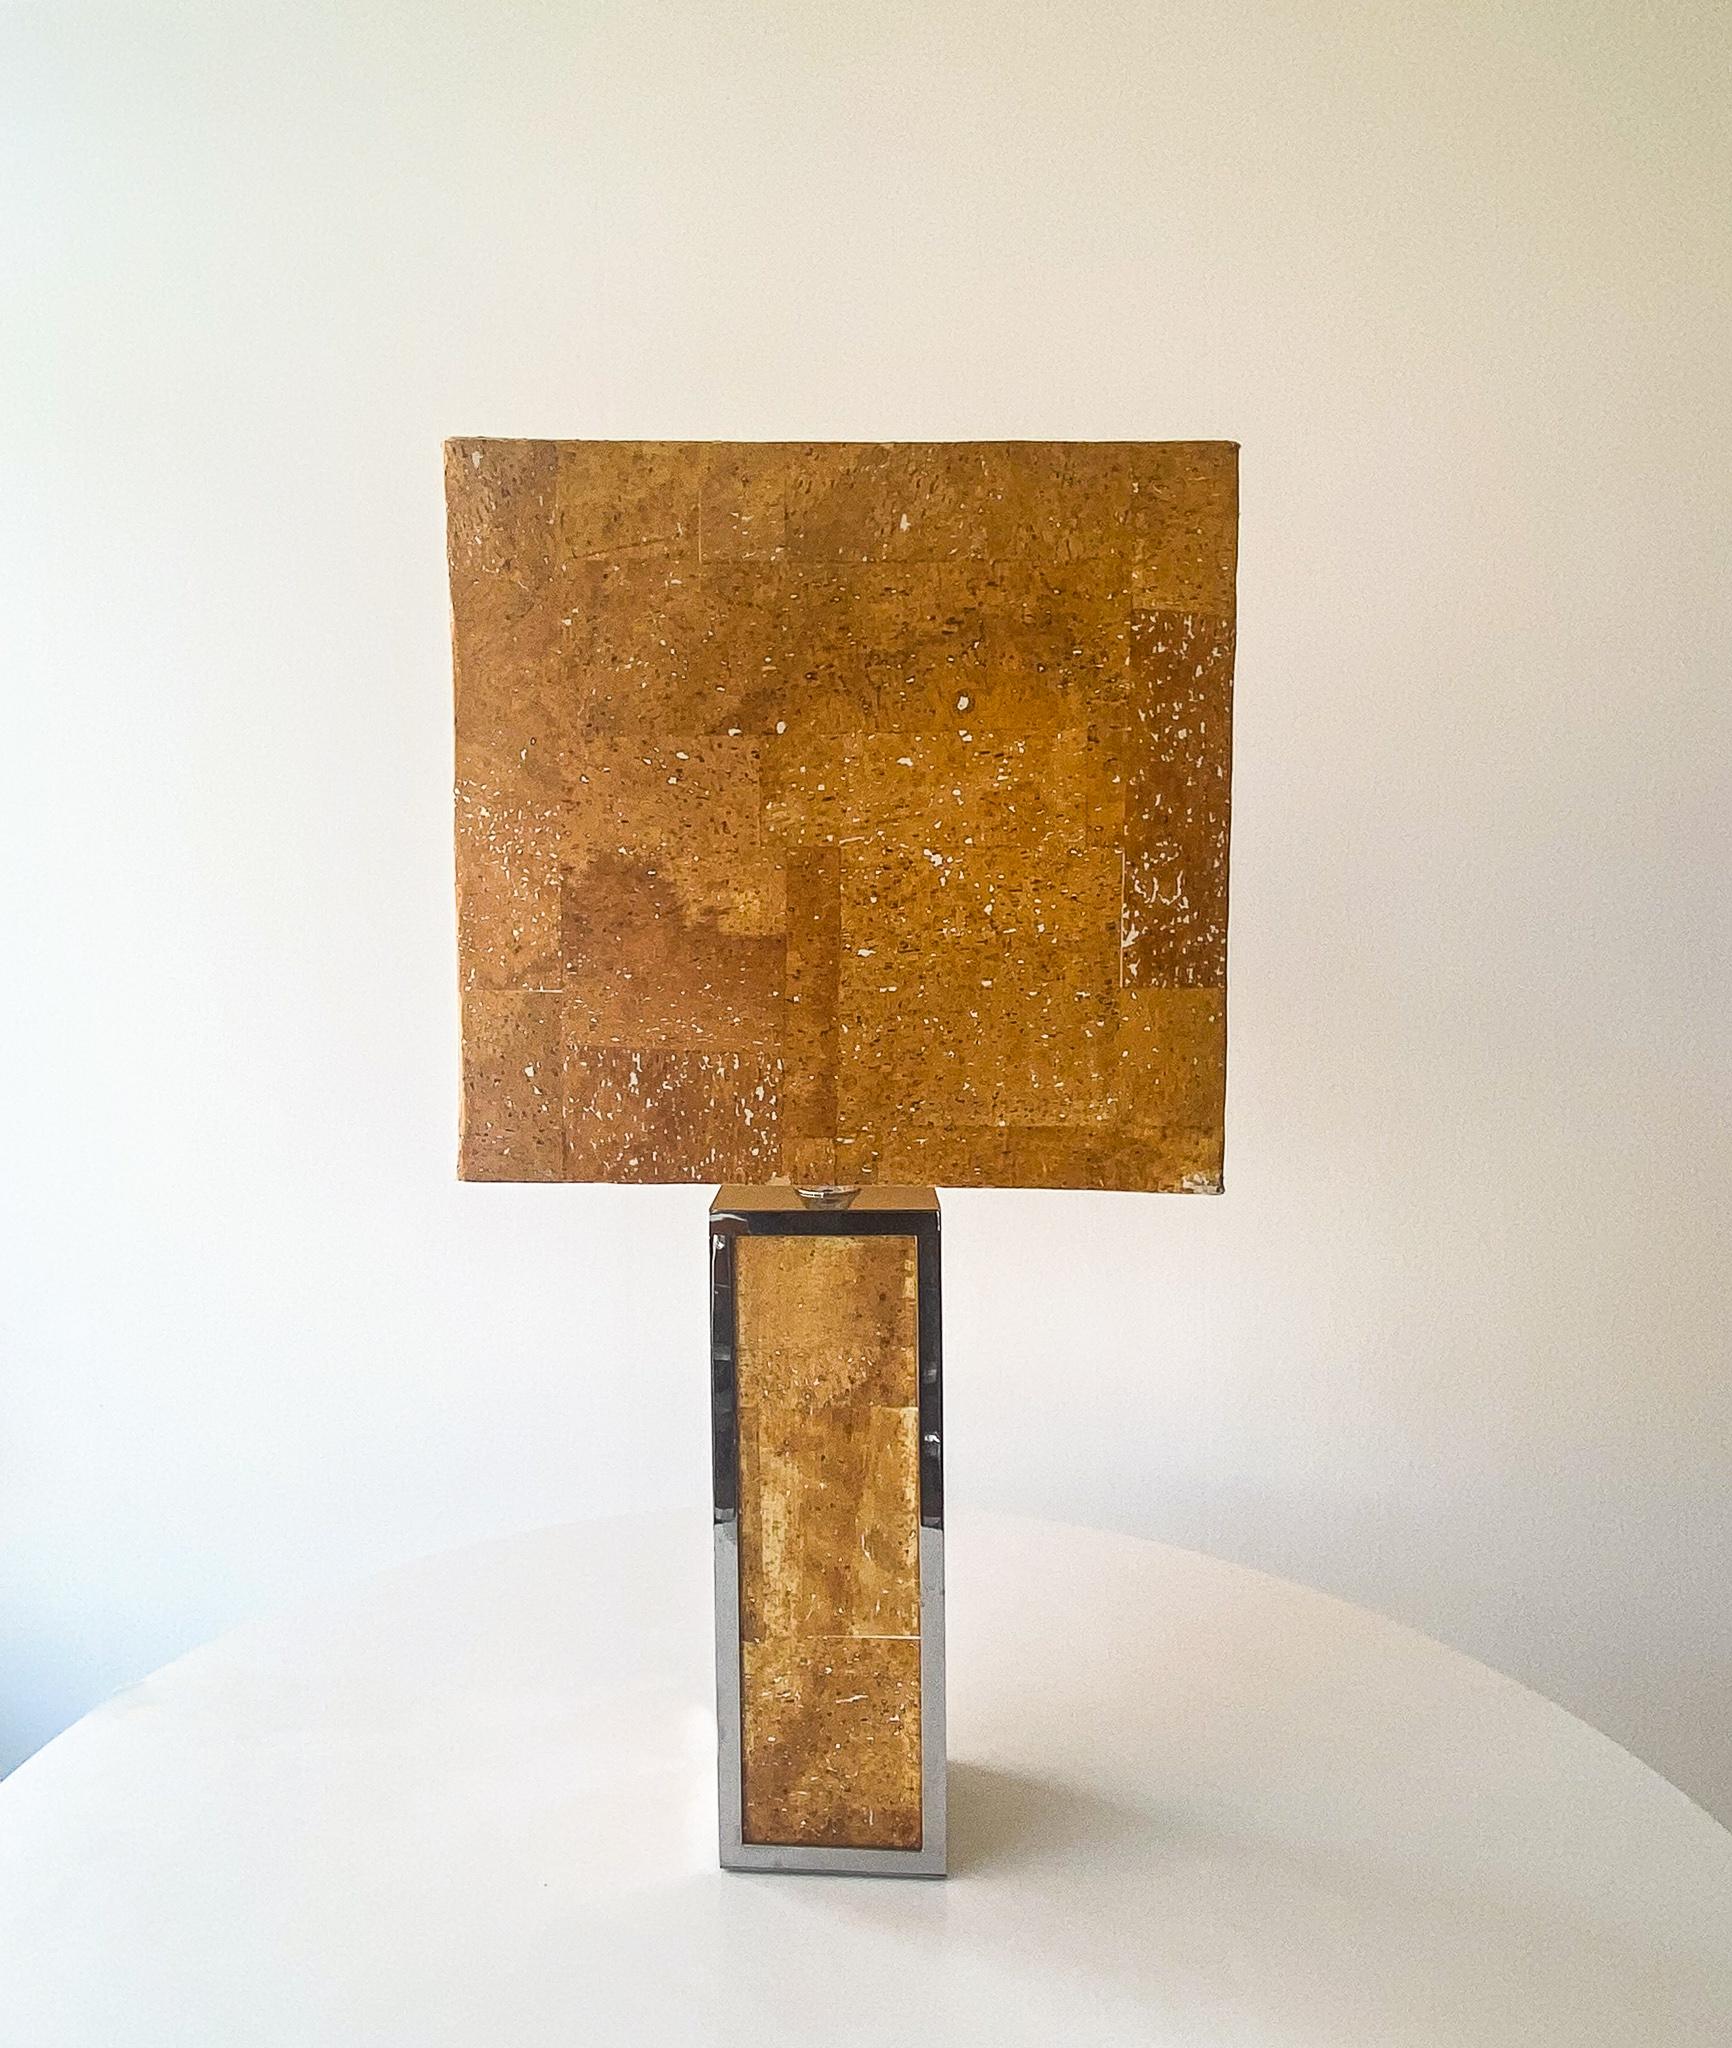 Mid-Century Modern rectangular cork chrome table lamp, Italy 1970s.

One of a kind Italian table lamp completely made of cork with some chrome elements on the base. This rare table lamp of the 70s consists of a large rectangular lampshade which is